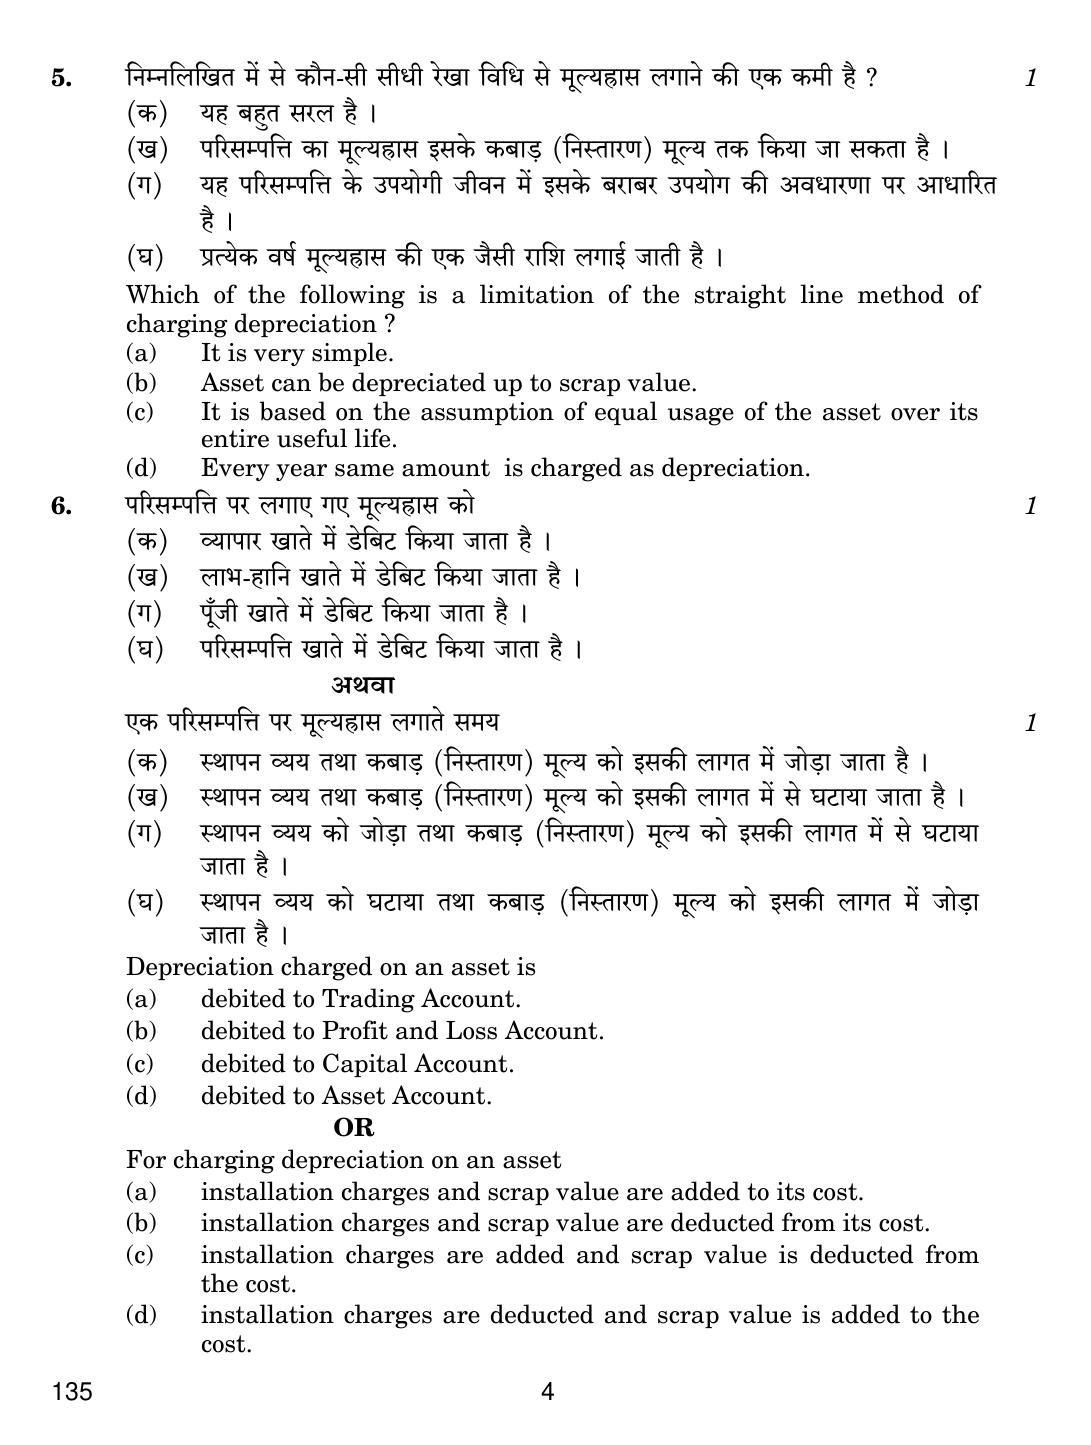 CBSE Class 10 135 ELEMENTS OF BOOK-KEEPING AND ACCOUNTANCY (COMMERCE) 2019 Question Paper - Page 4